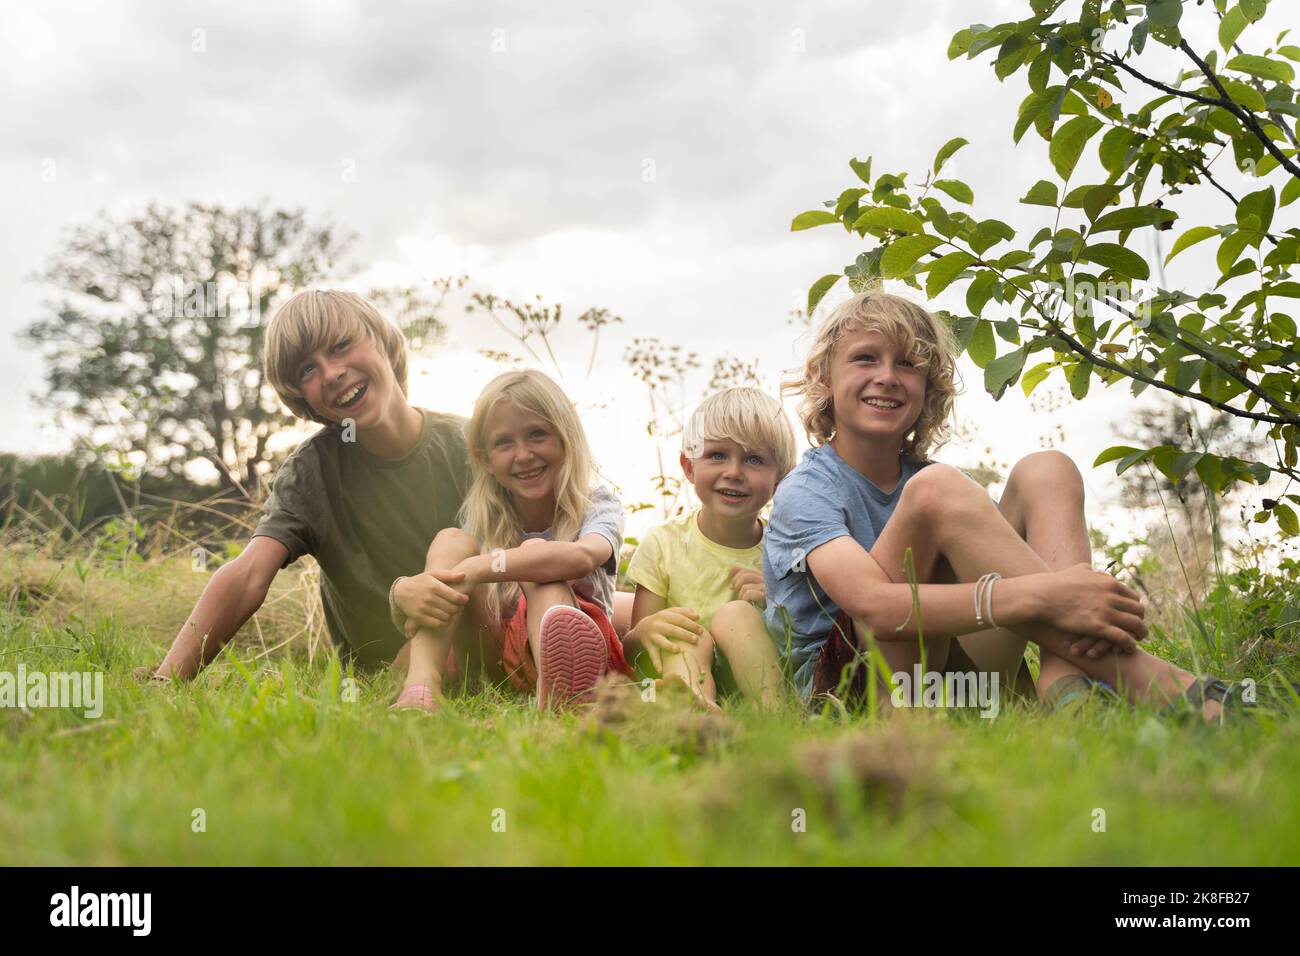 Smiling brothers and sister with blond hairs sitting on grass Stock Photo